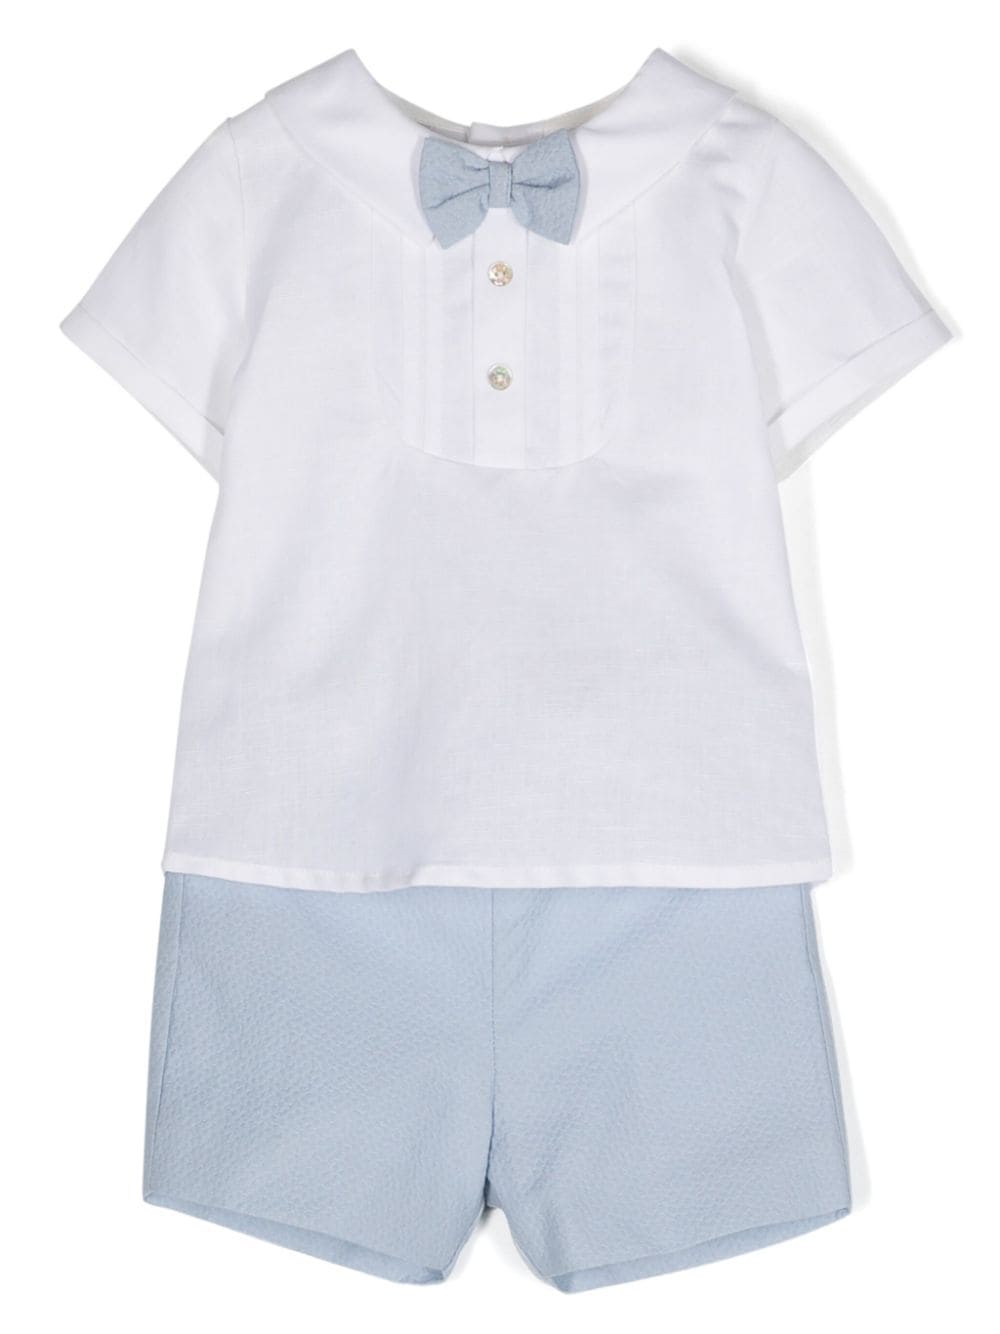 Paz Rodriguez Babies' Bow-detail Shorts Set In White